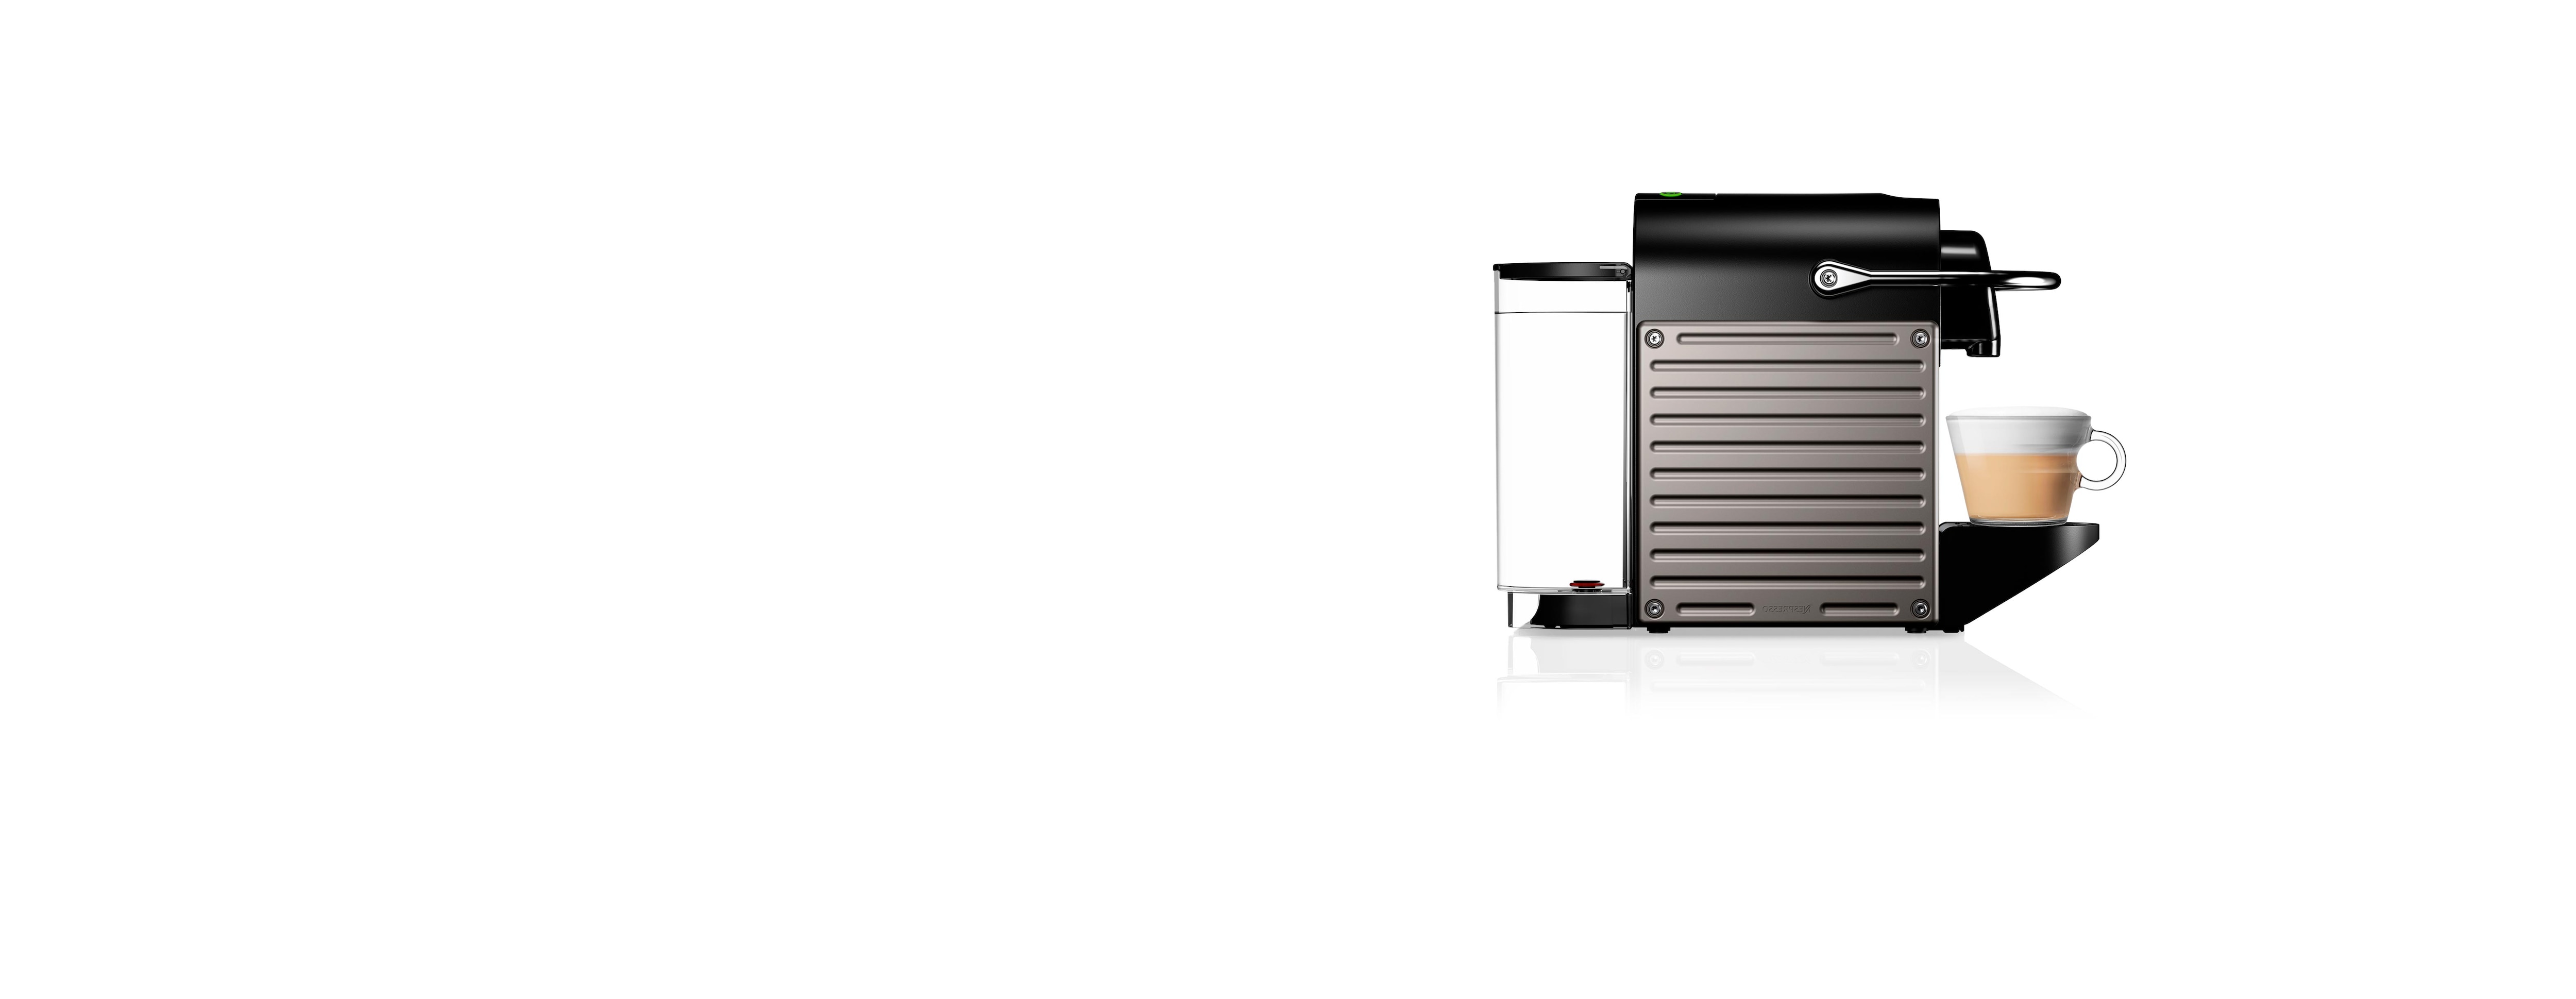 Nespresso Pixie & Aeroccino3 – A Great Gift Idea for Any Occasion - The  Wandering Eater